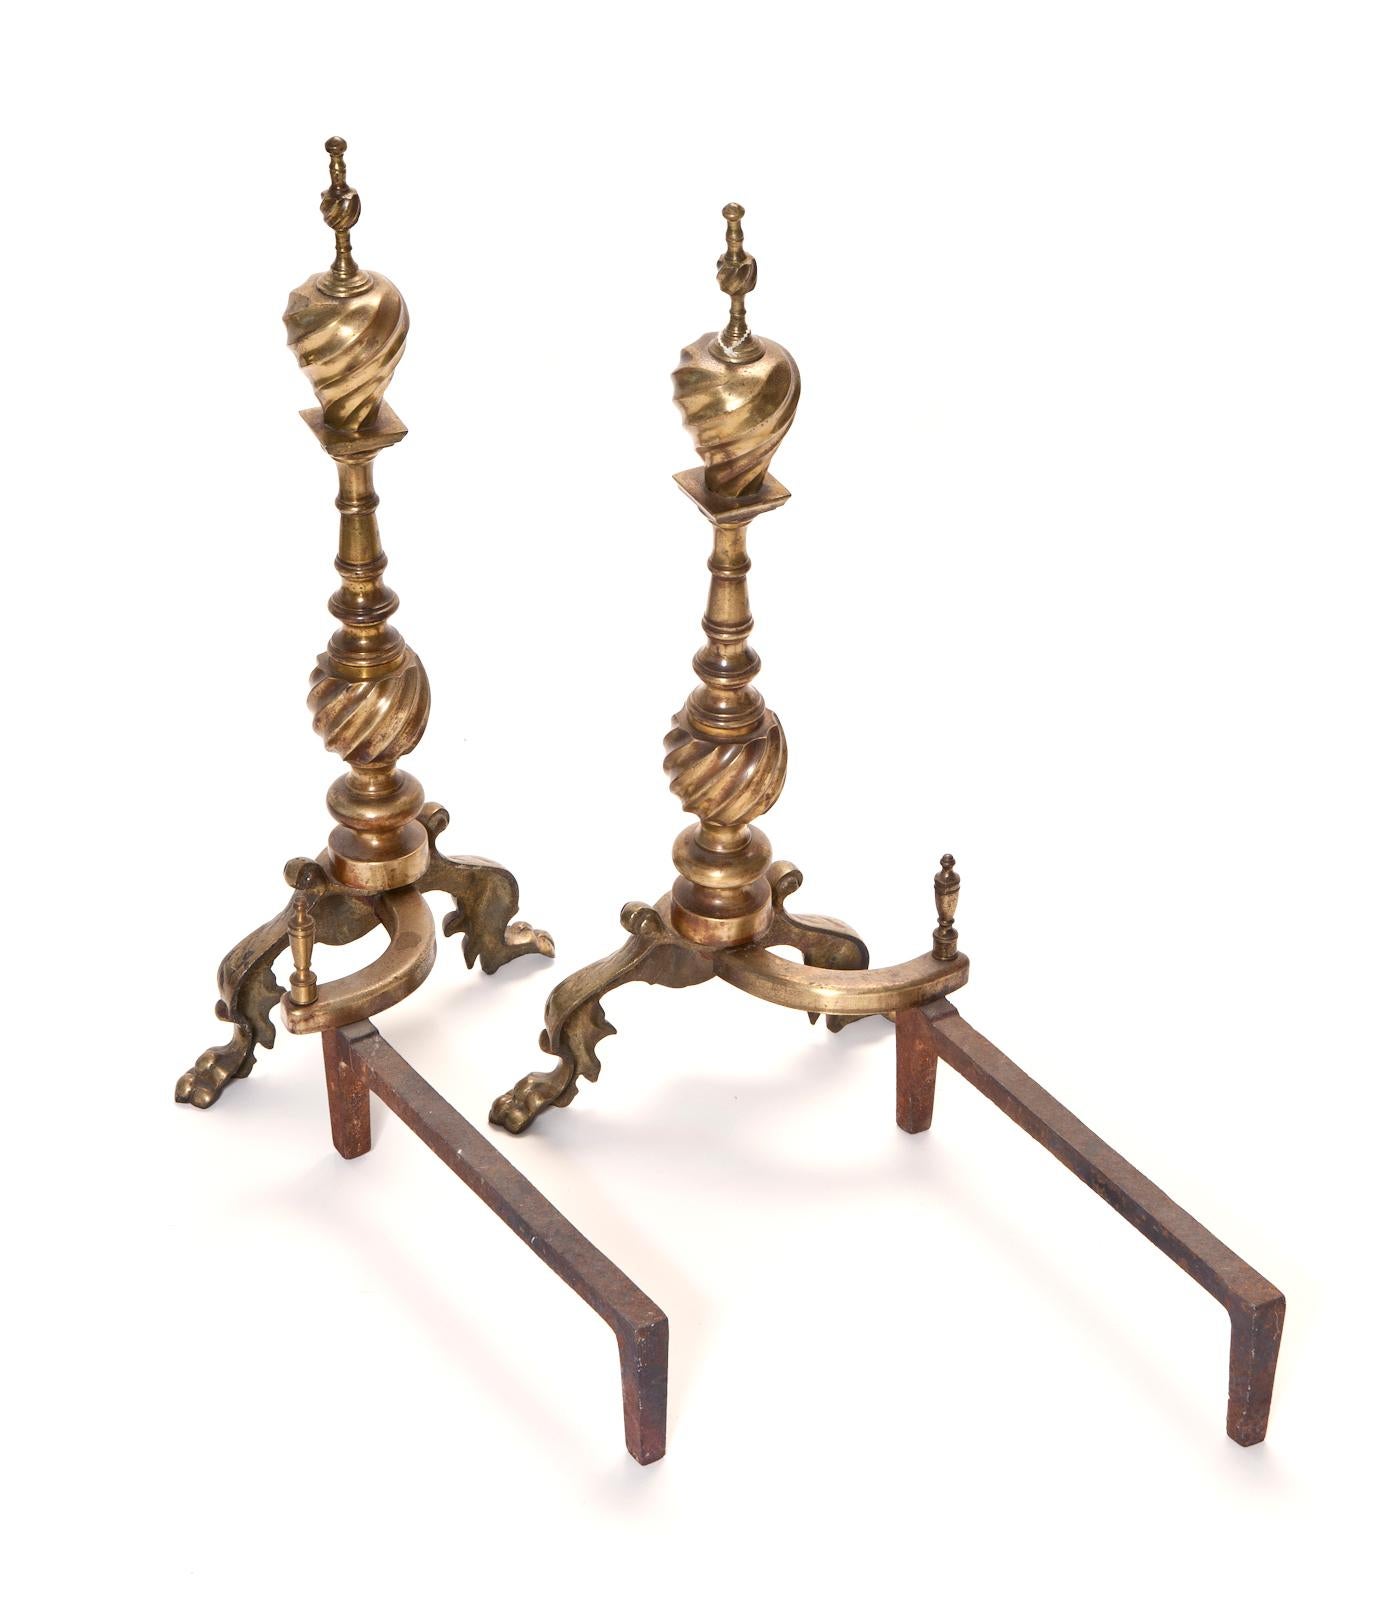 20th Century Antique Traditional European Andirons, a Pair